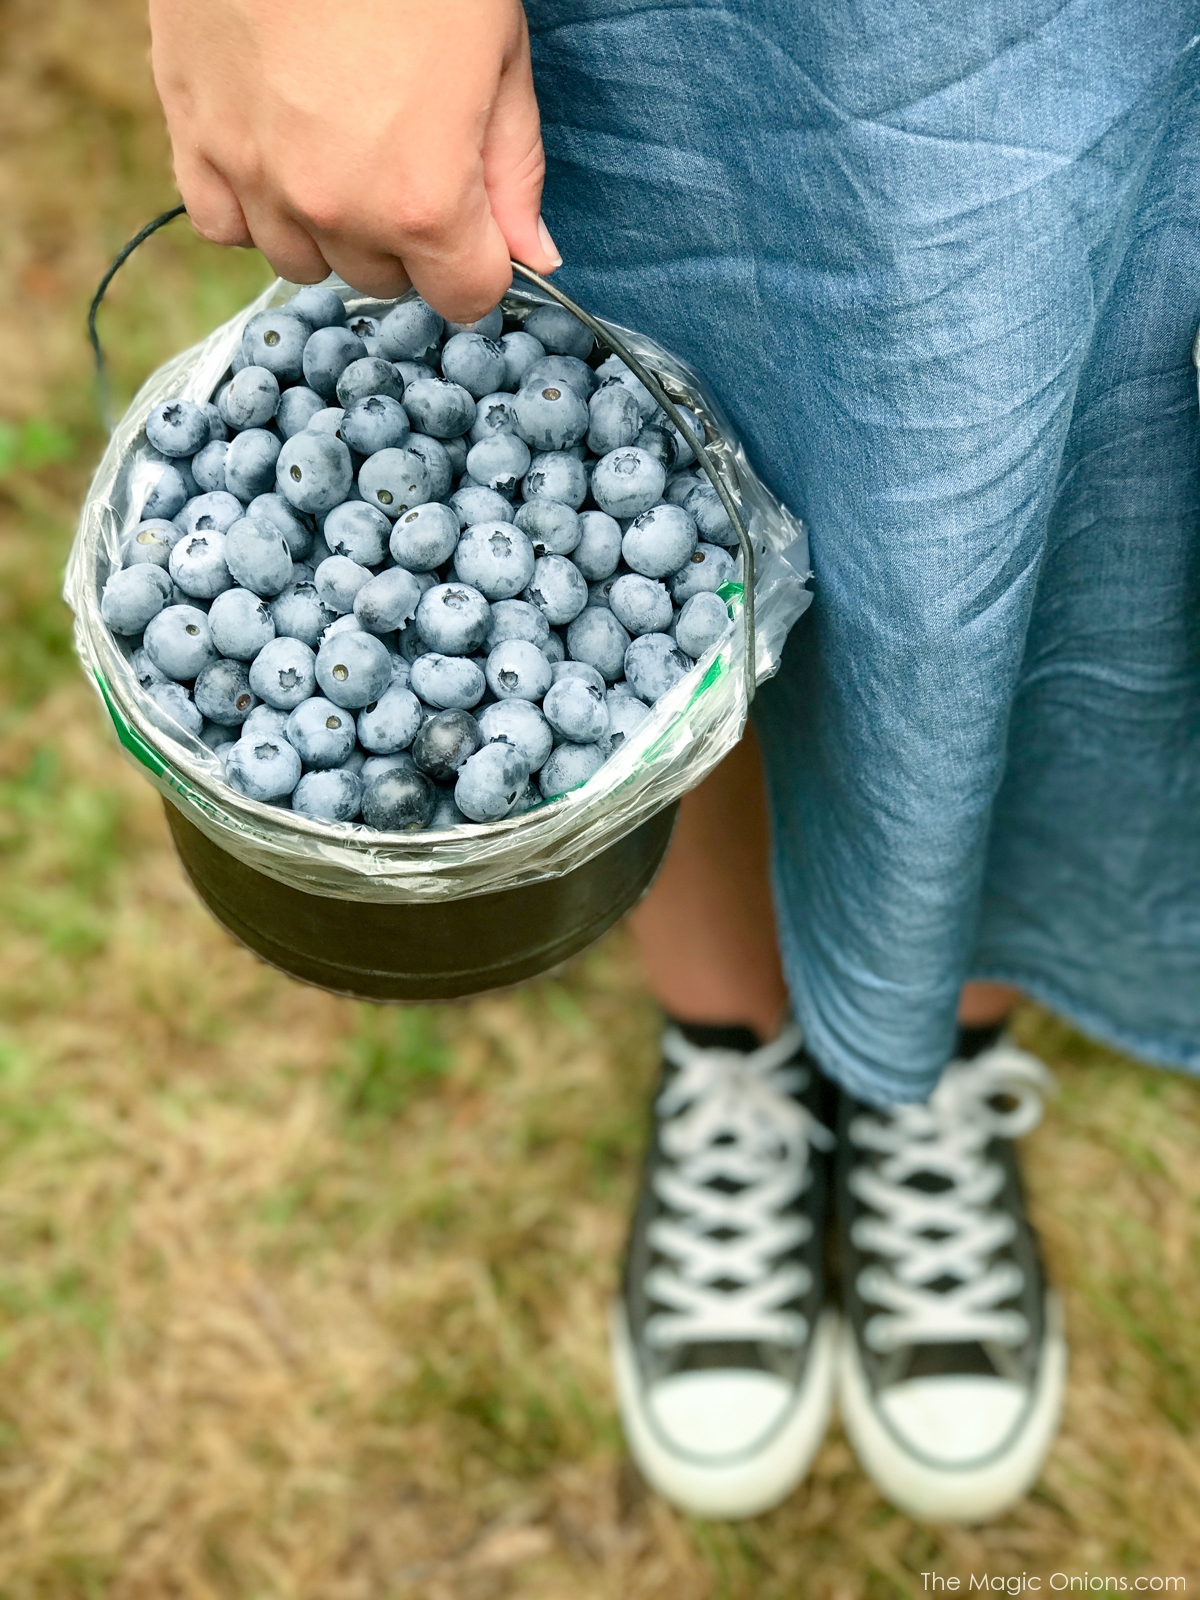 Picking Blueberries at Monadnock Berries, New Hampshire 7